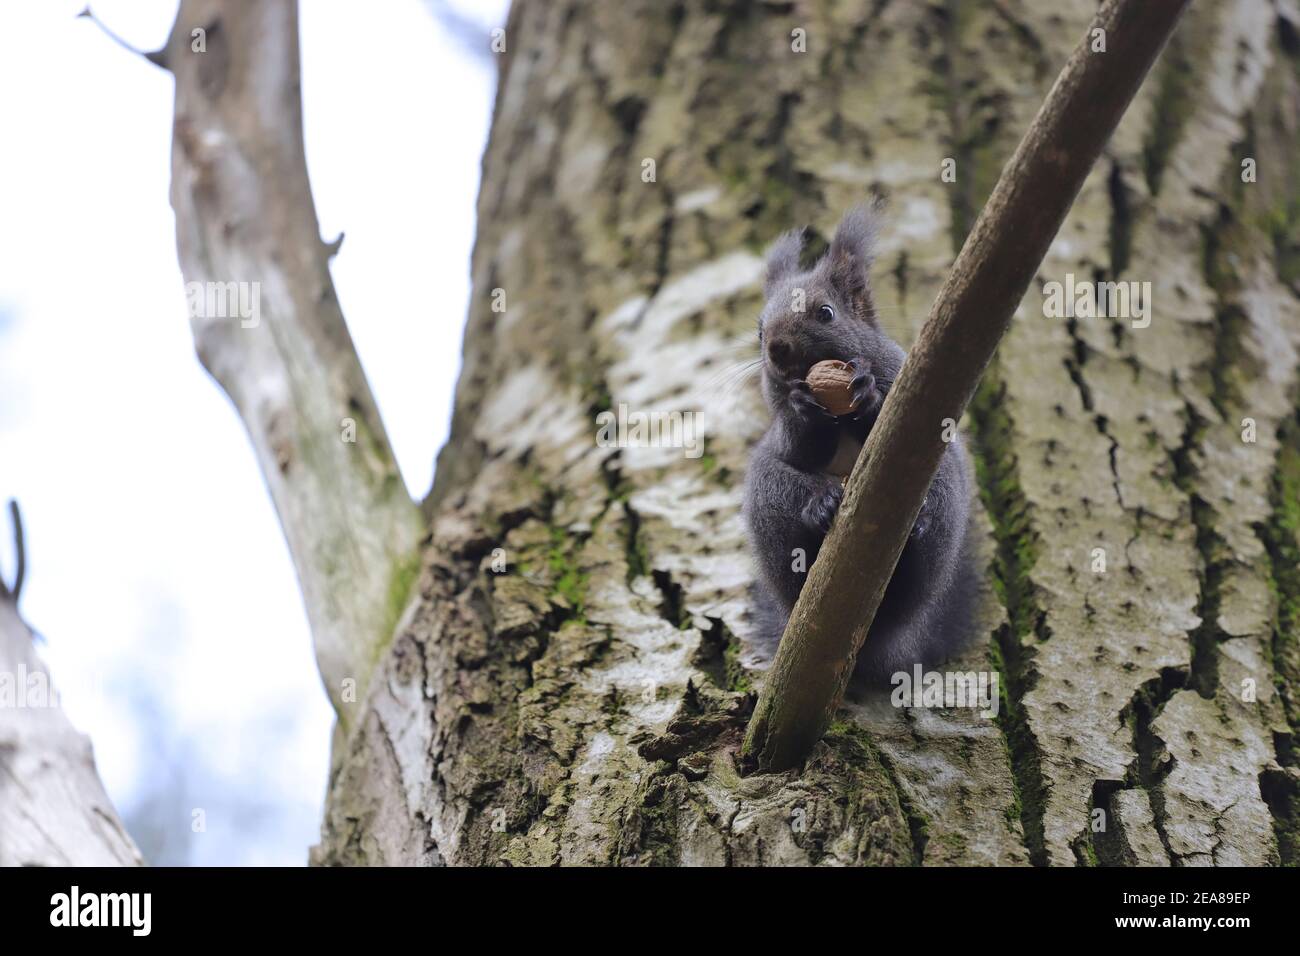 Squirrel stands on a branch cracks and eats a walnut Stock Photo